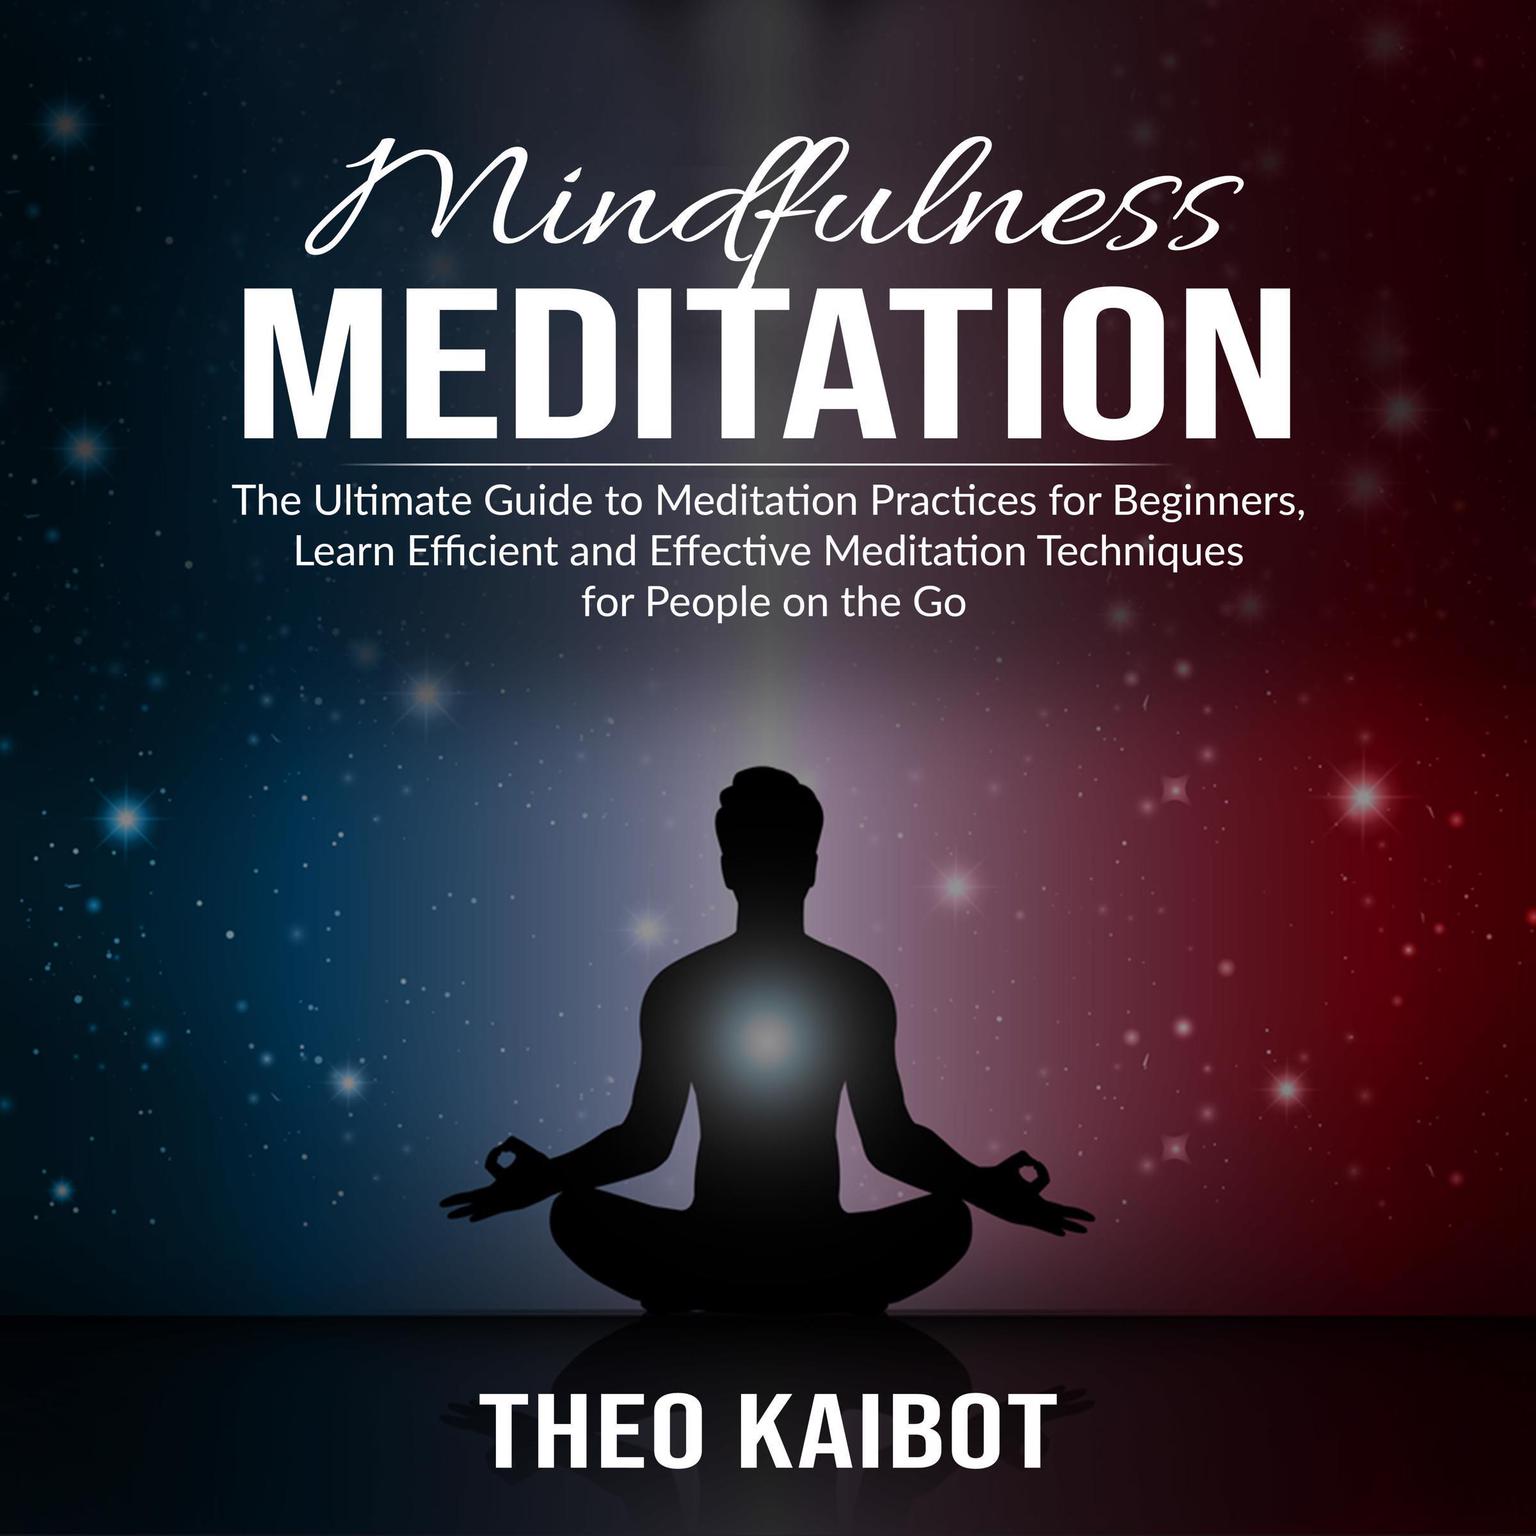 Mindfulness Meditation: The Ultimate Guide to Meditation Practices for Beginners, Learn Efficient and Effective Meditation Techniques for People on the Go Audiobook, by Theo Kaibot